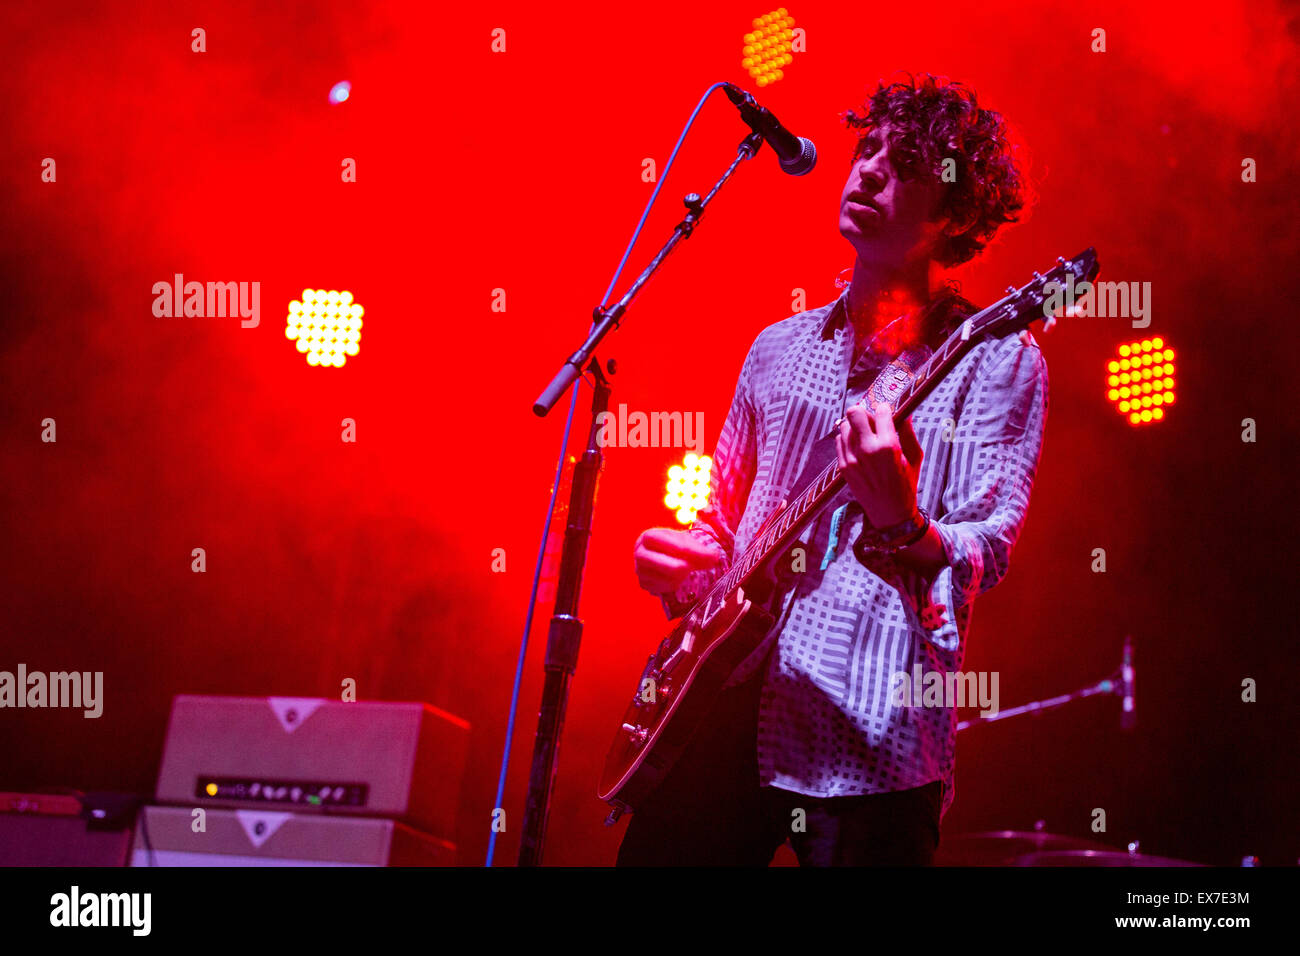 Dover, Deleware, USA. 18th June, 2015. Musician LUKE PRITCHARD of The Kooks performs live on stage at the Firefly Music Festival in Dover, Delaware © Daniel DeSlover/ZUMA Wire/Alamy Live News Stock Photo